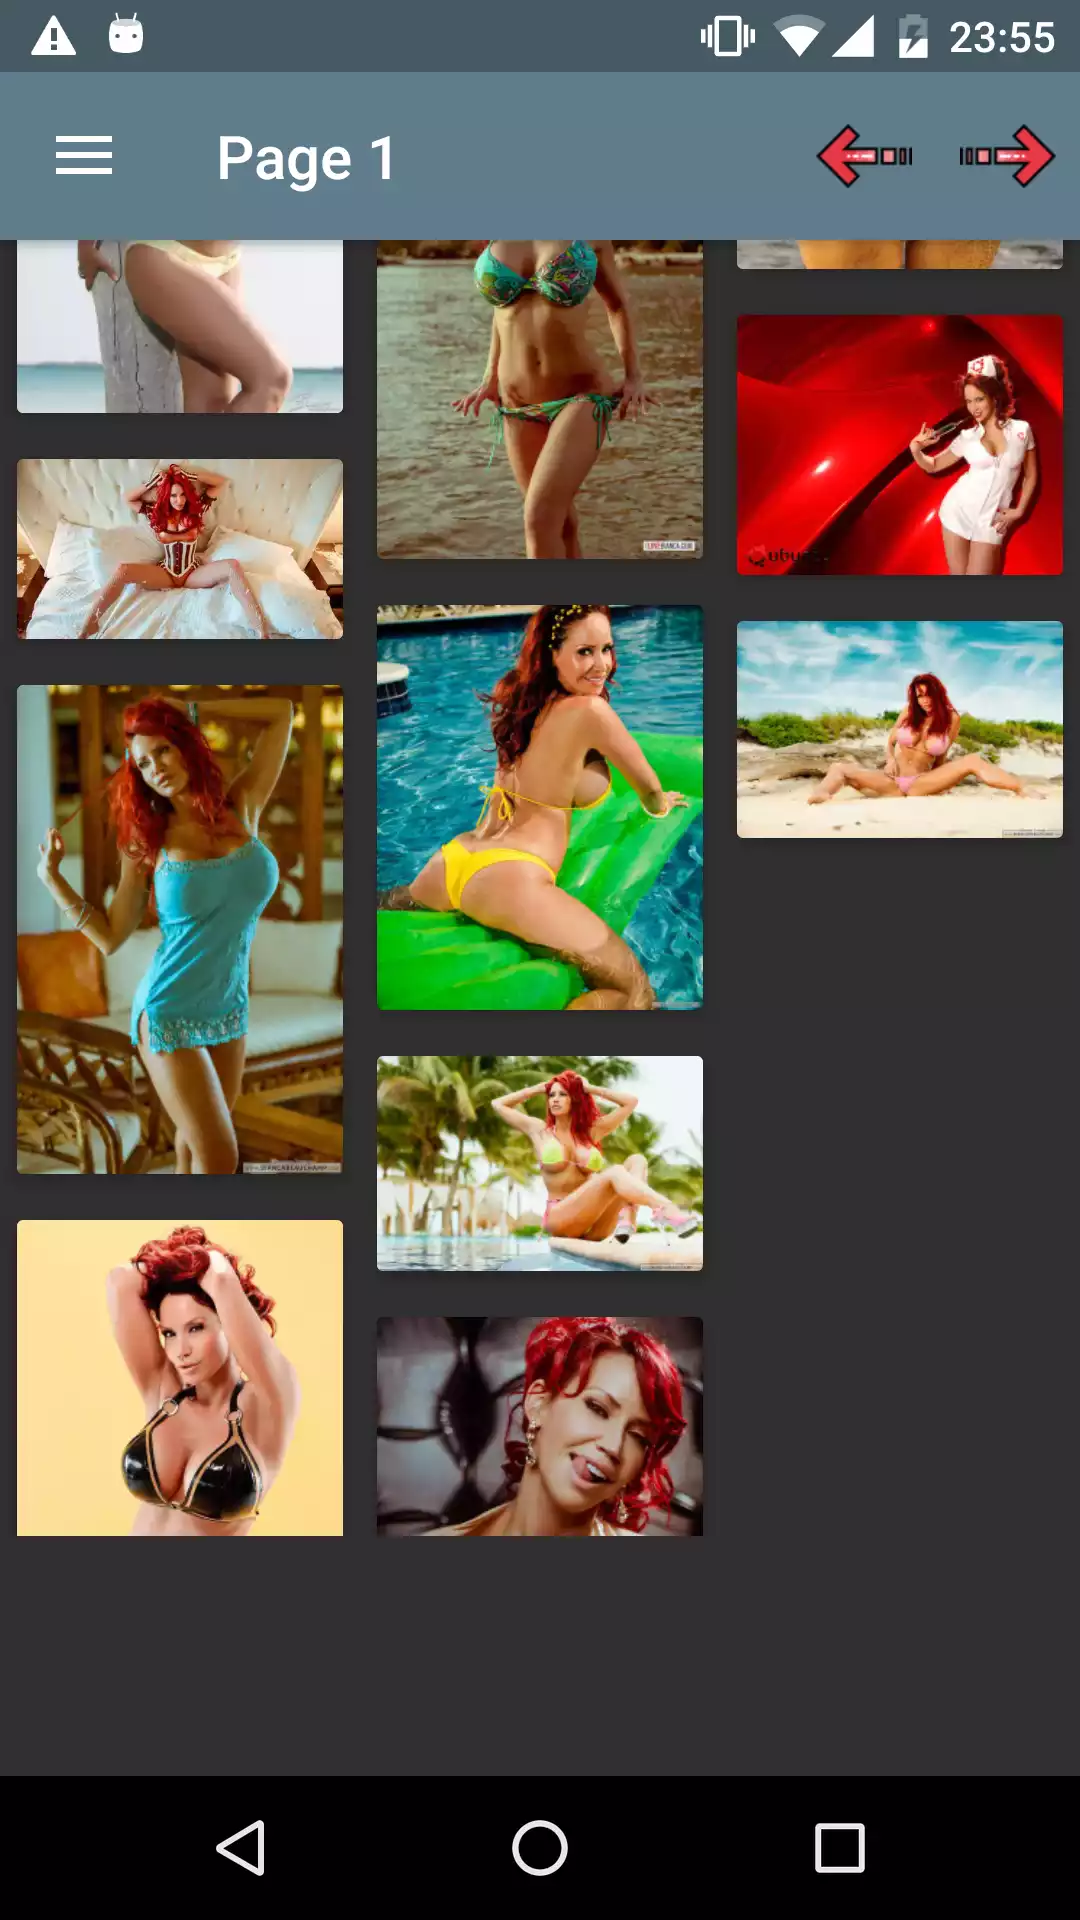 Bianca Beauchamp best,pictures,shrinking,dreams,video,sexy,erotic,backgrounds,apk,updates,lane,henti,lily,android,pic,manga,tuesday,images,hentai,titty,app,pics,anime,porn,wallpapers,for,henta